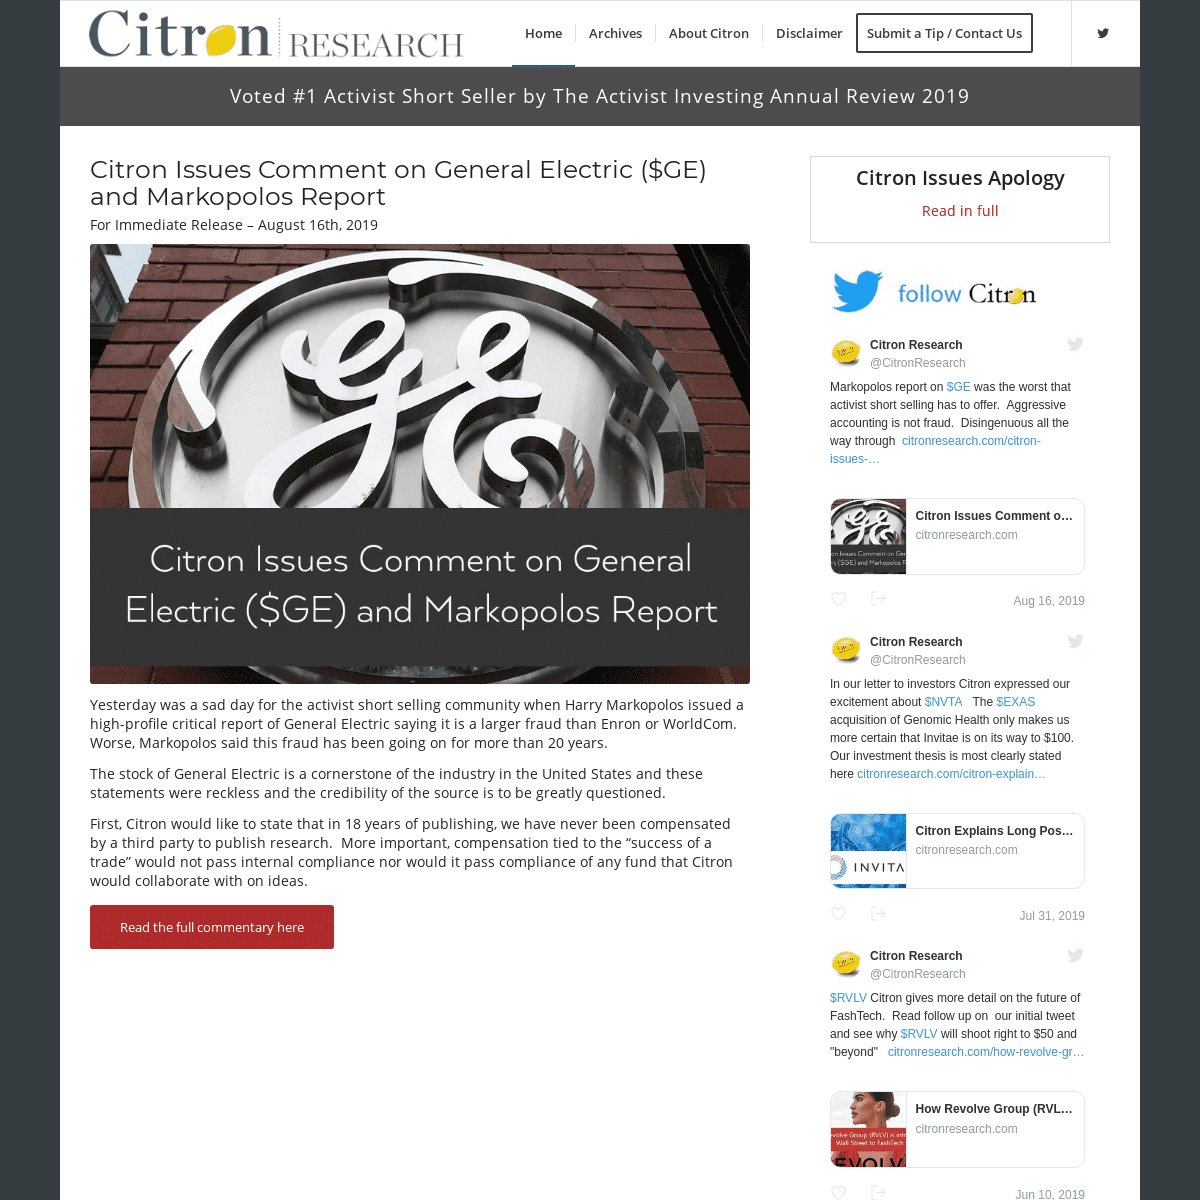 Citron Research | Executive Editor Andrew Left | Publishing Since 2001